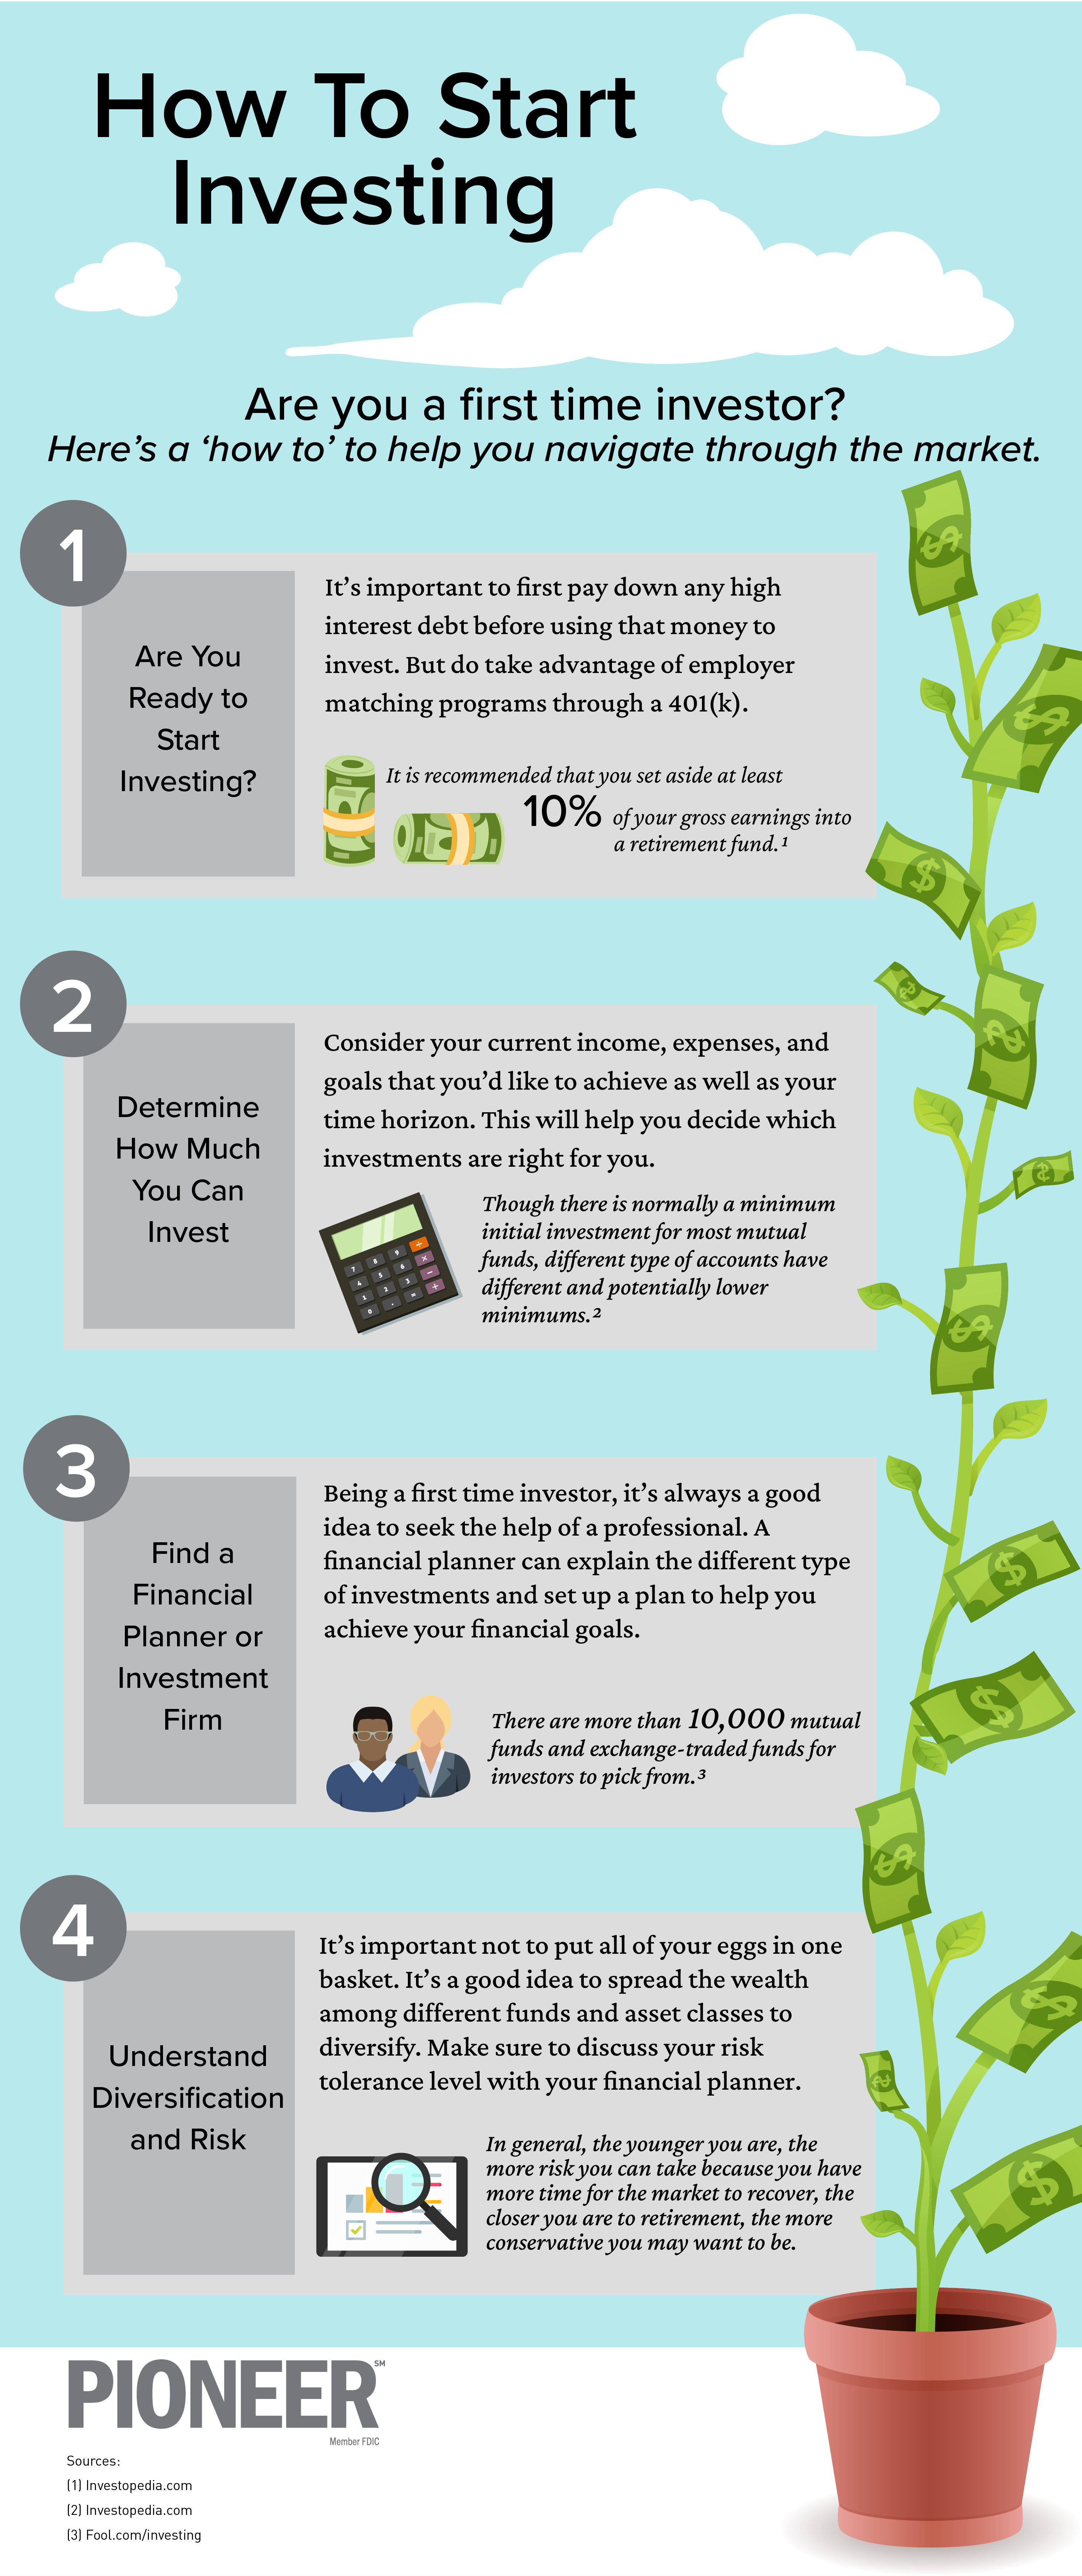 How to Start Investing graphic